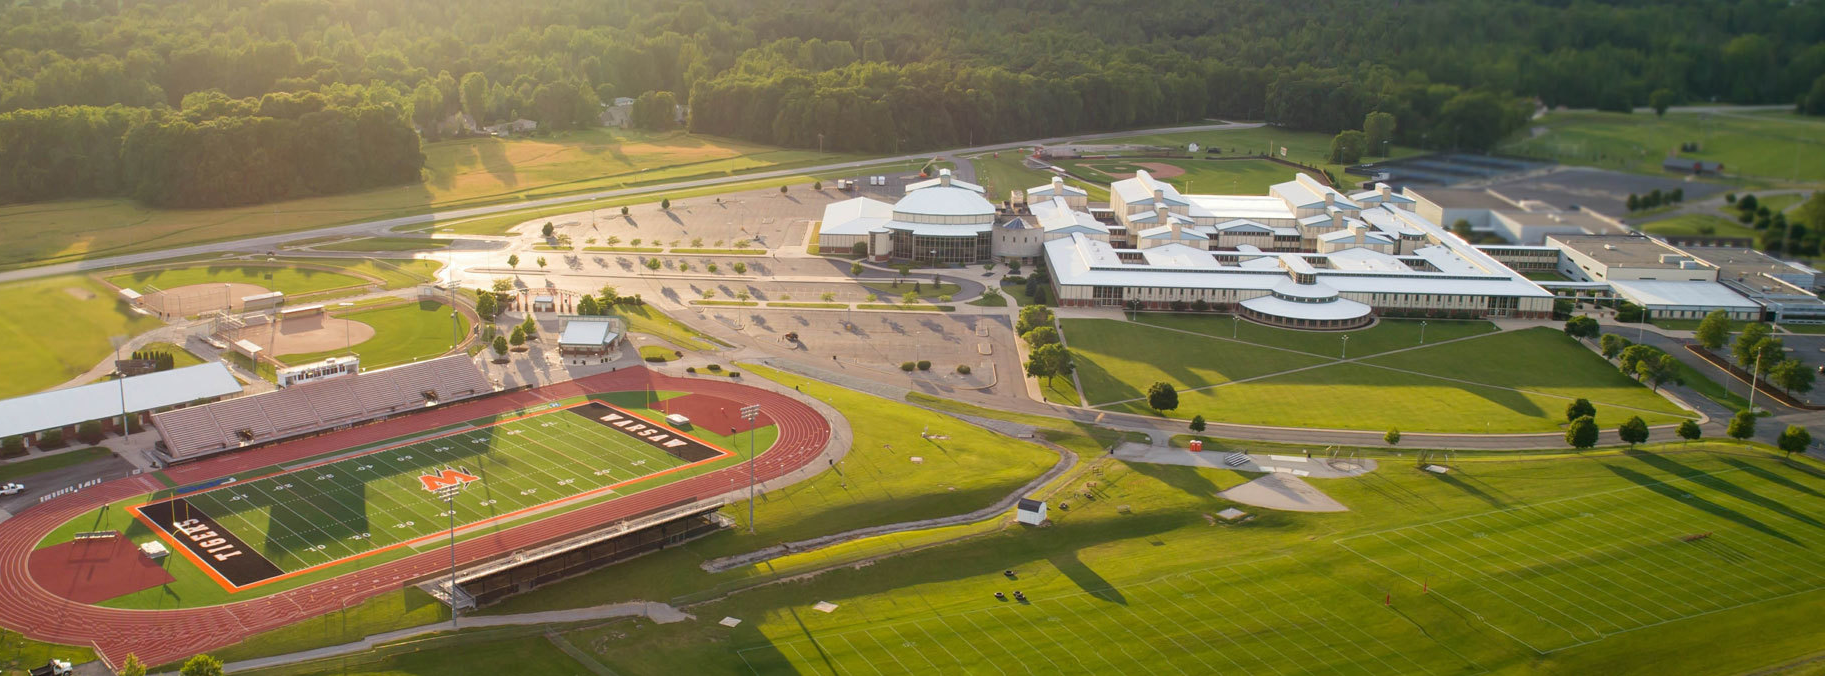 aerial view of high school campus and football field